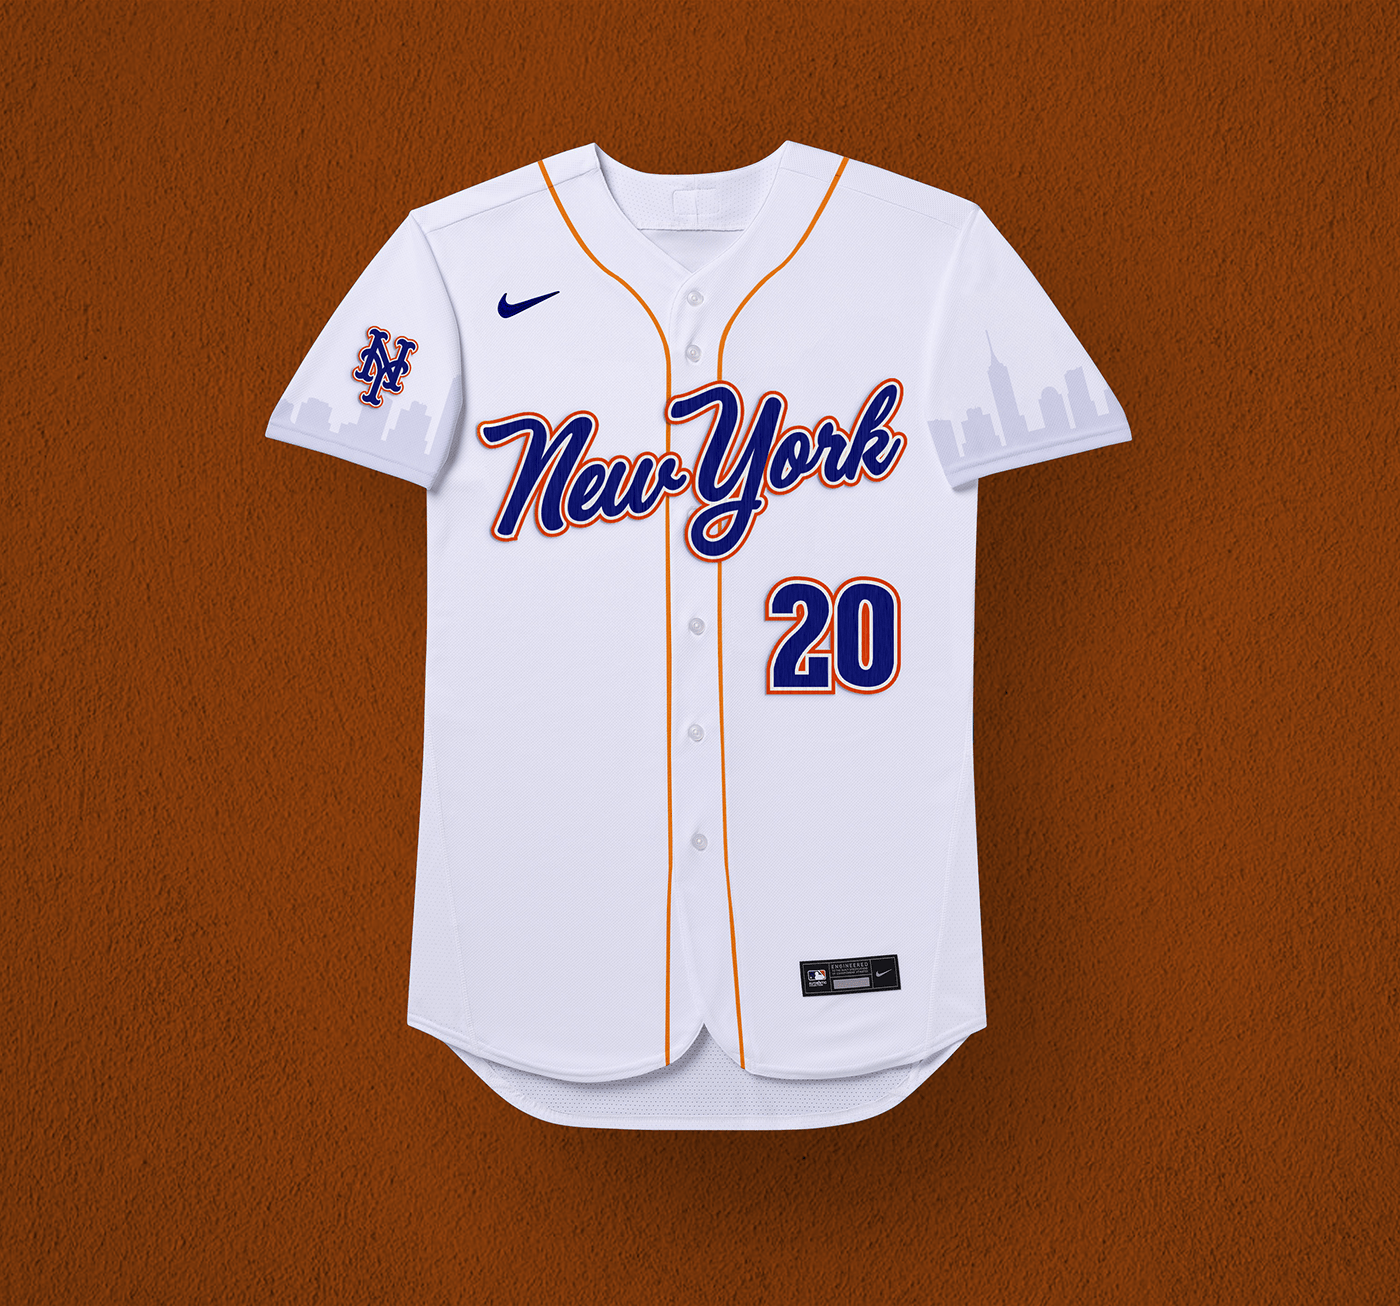 MLB Jersey Redesign Project on Behance